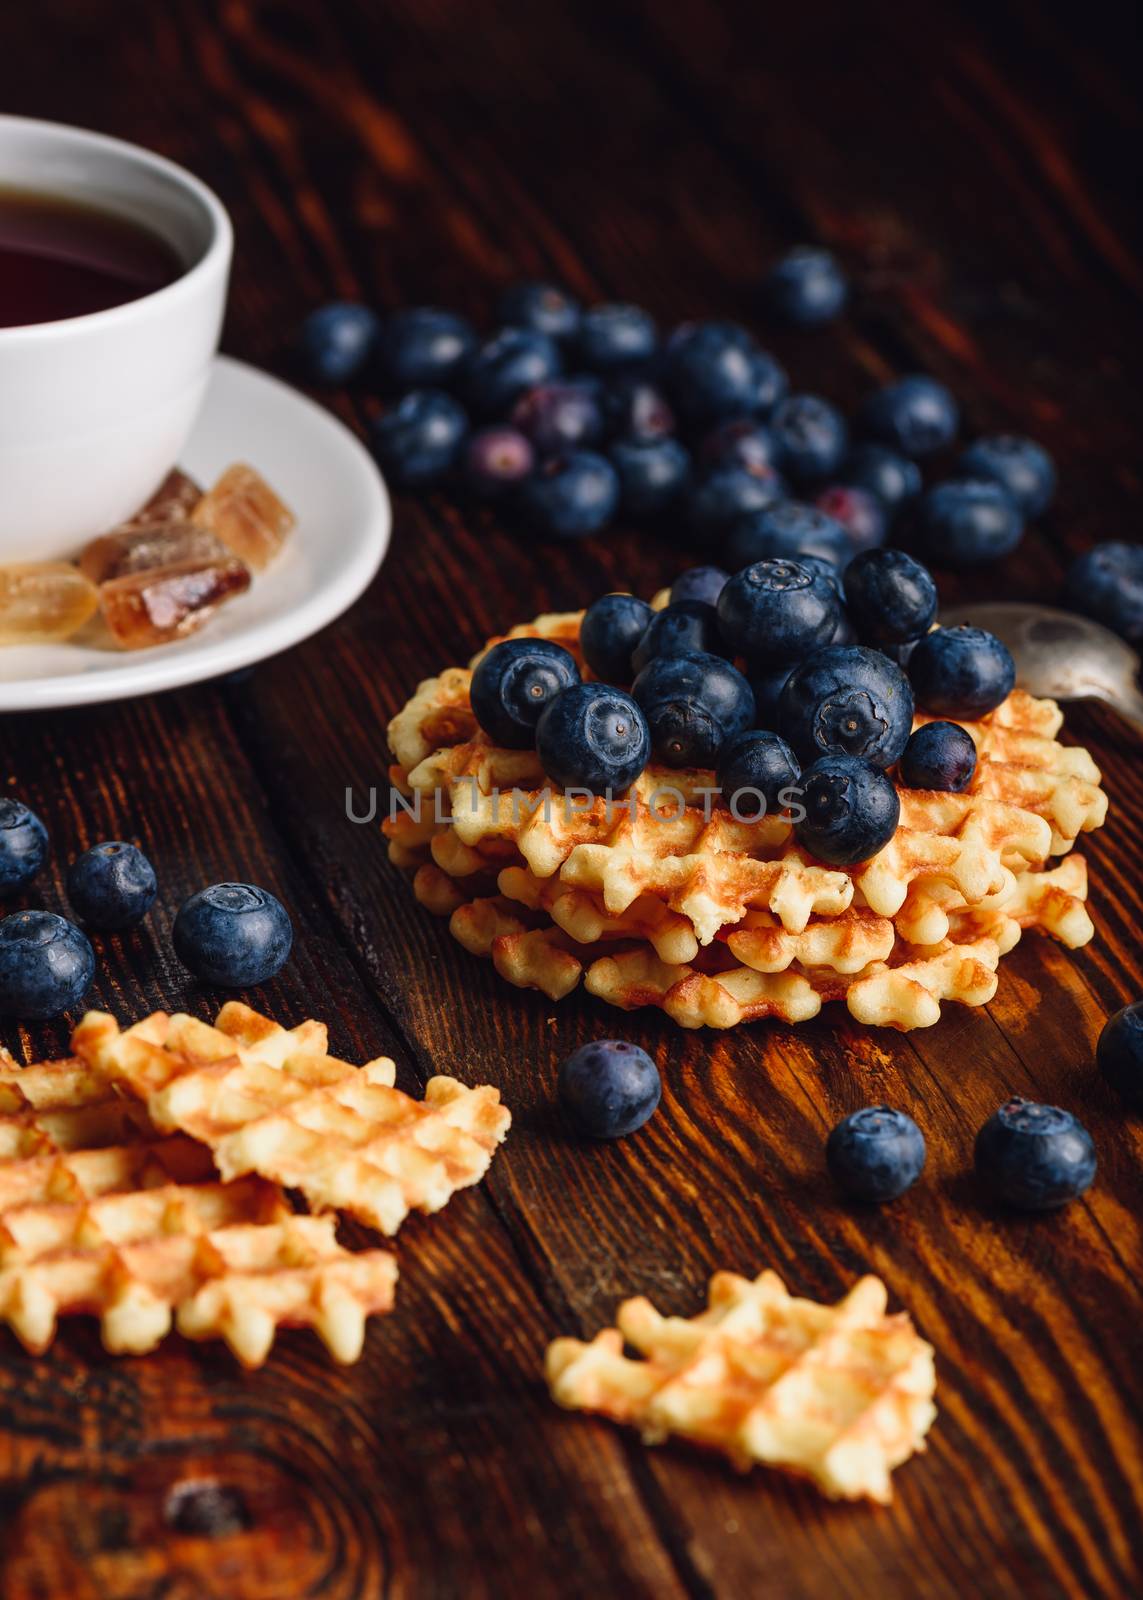 Cup of Tea with Blueberries on the Top of the Waffles Stack. Other Berries and Broken Waffle Scattered on Wooden Background.